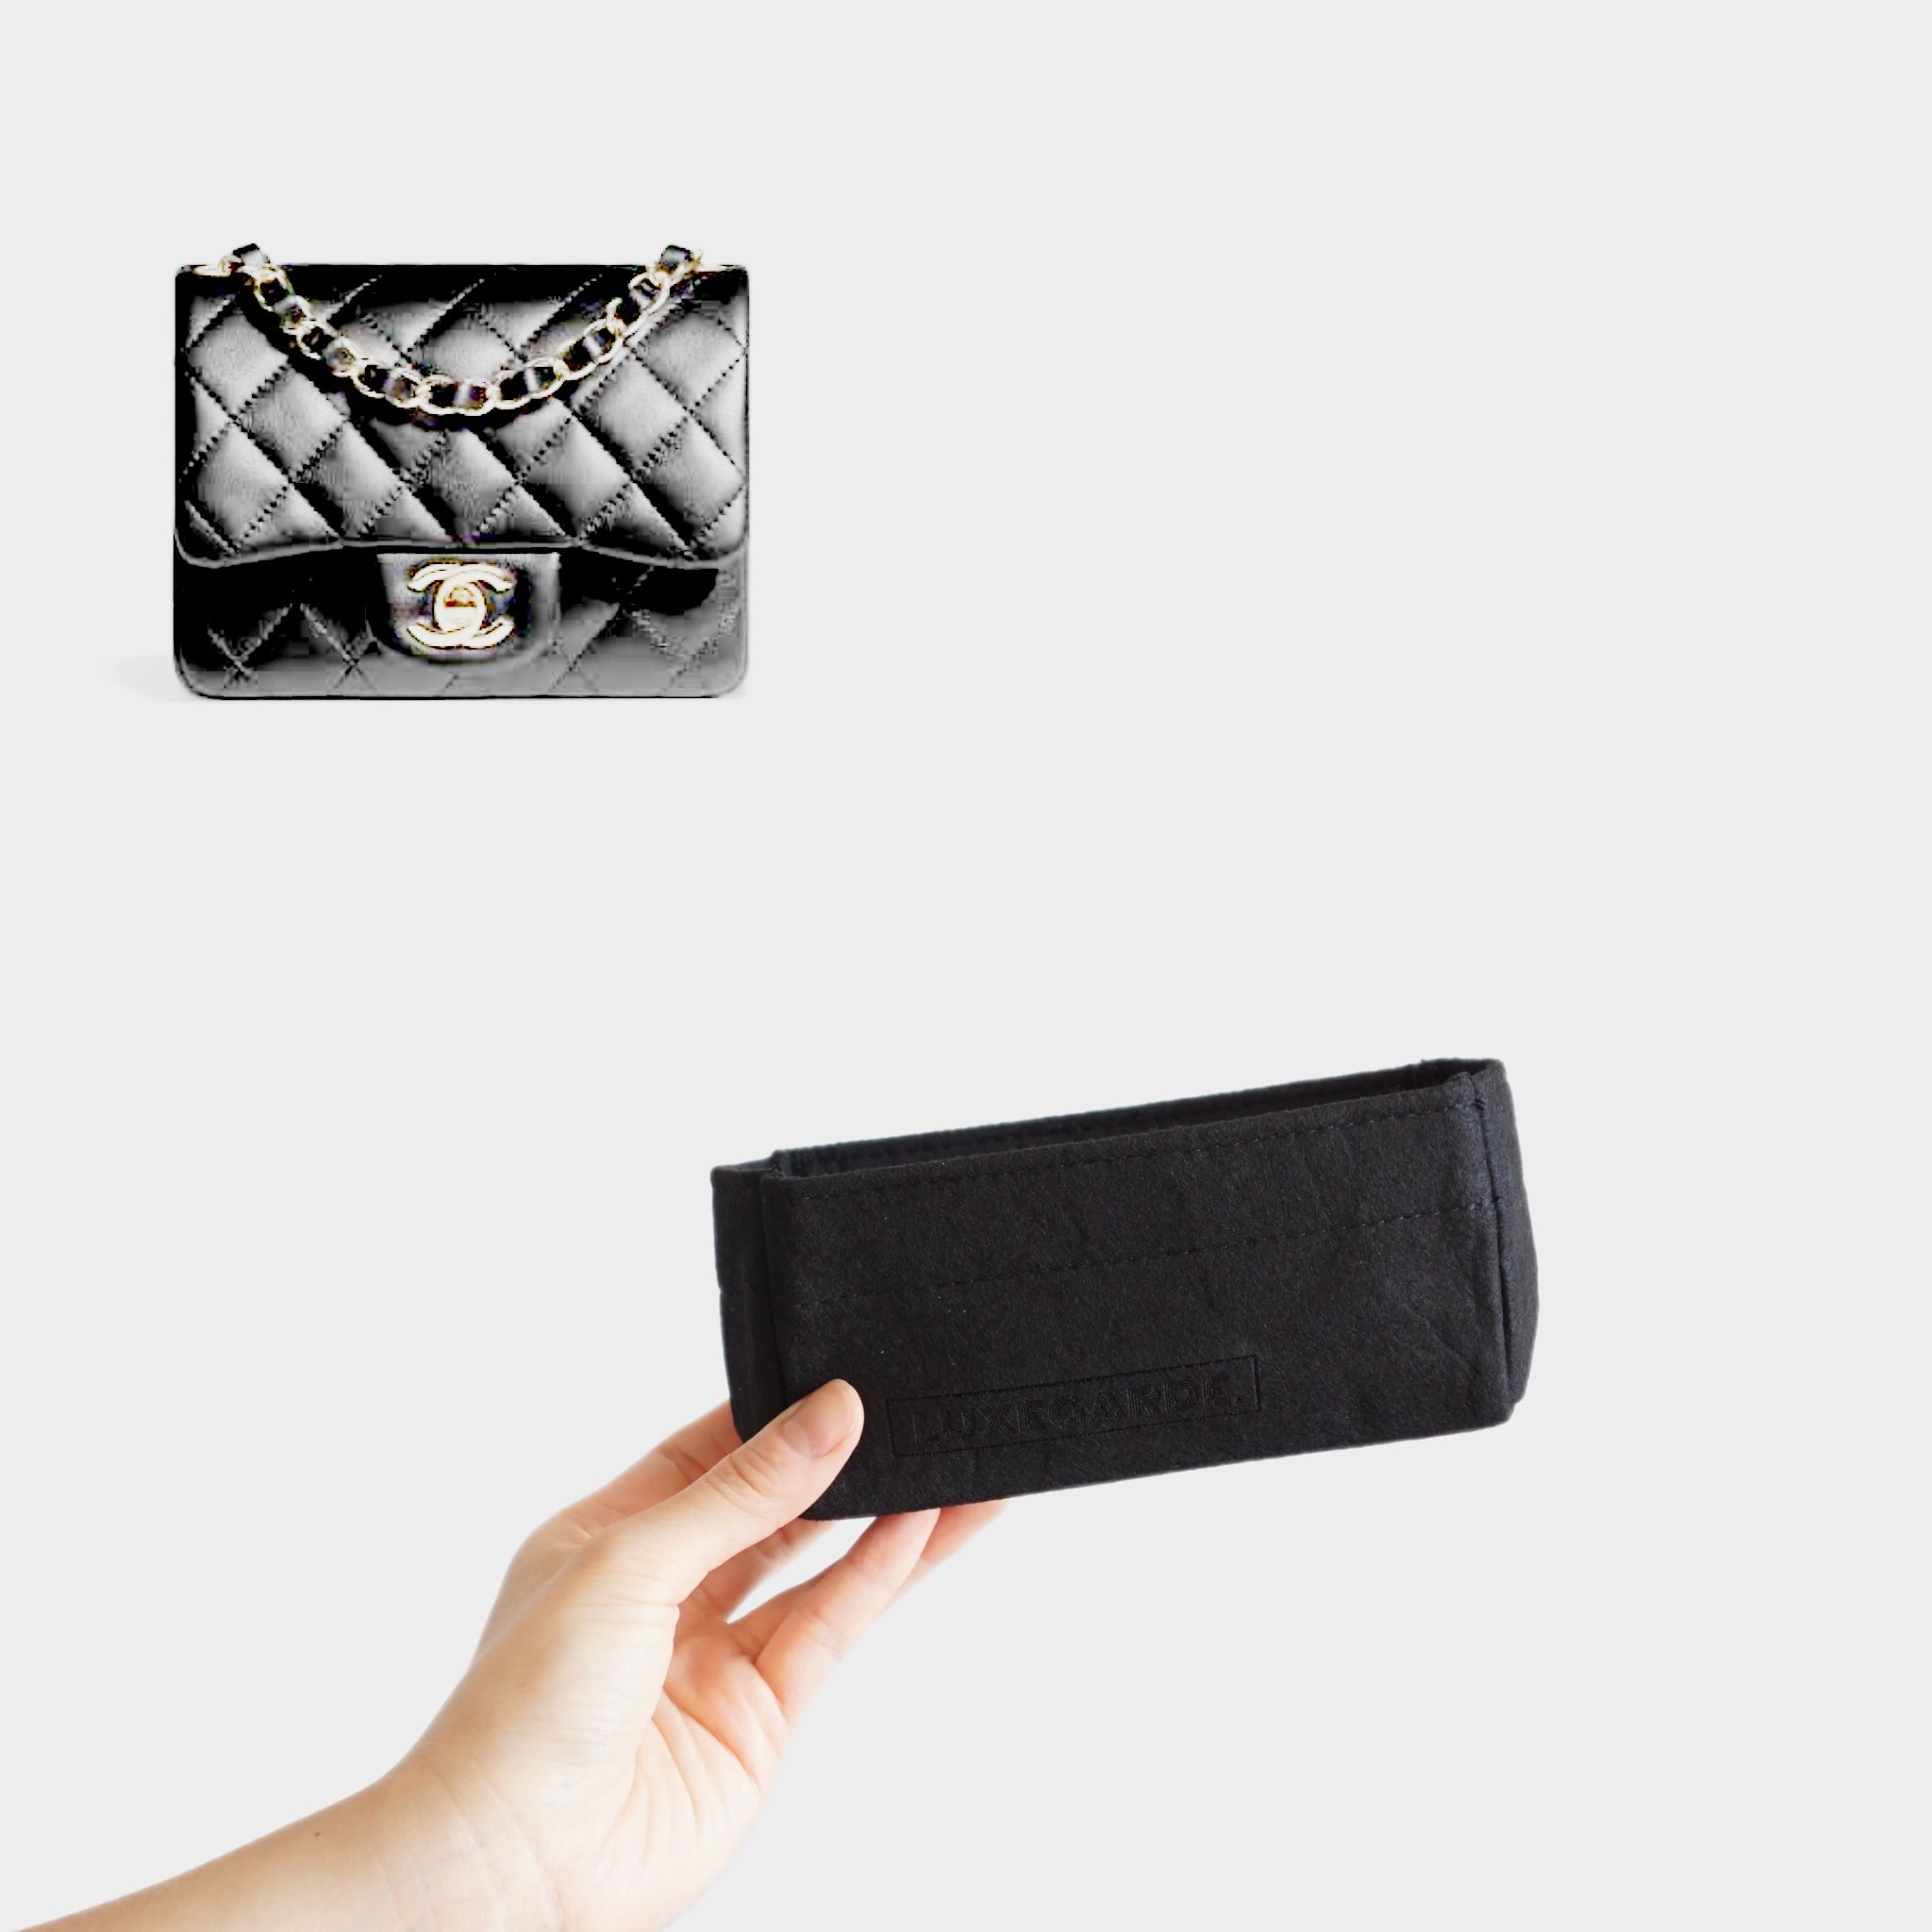 CHANEL MINI FLAP BAG REVIEW + WHATS IN MY BAG?!